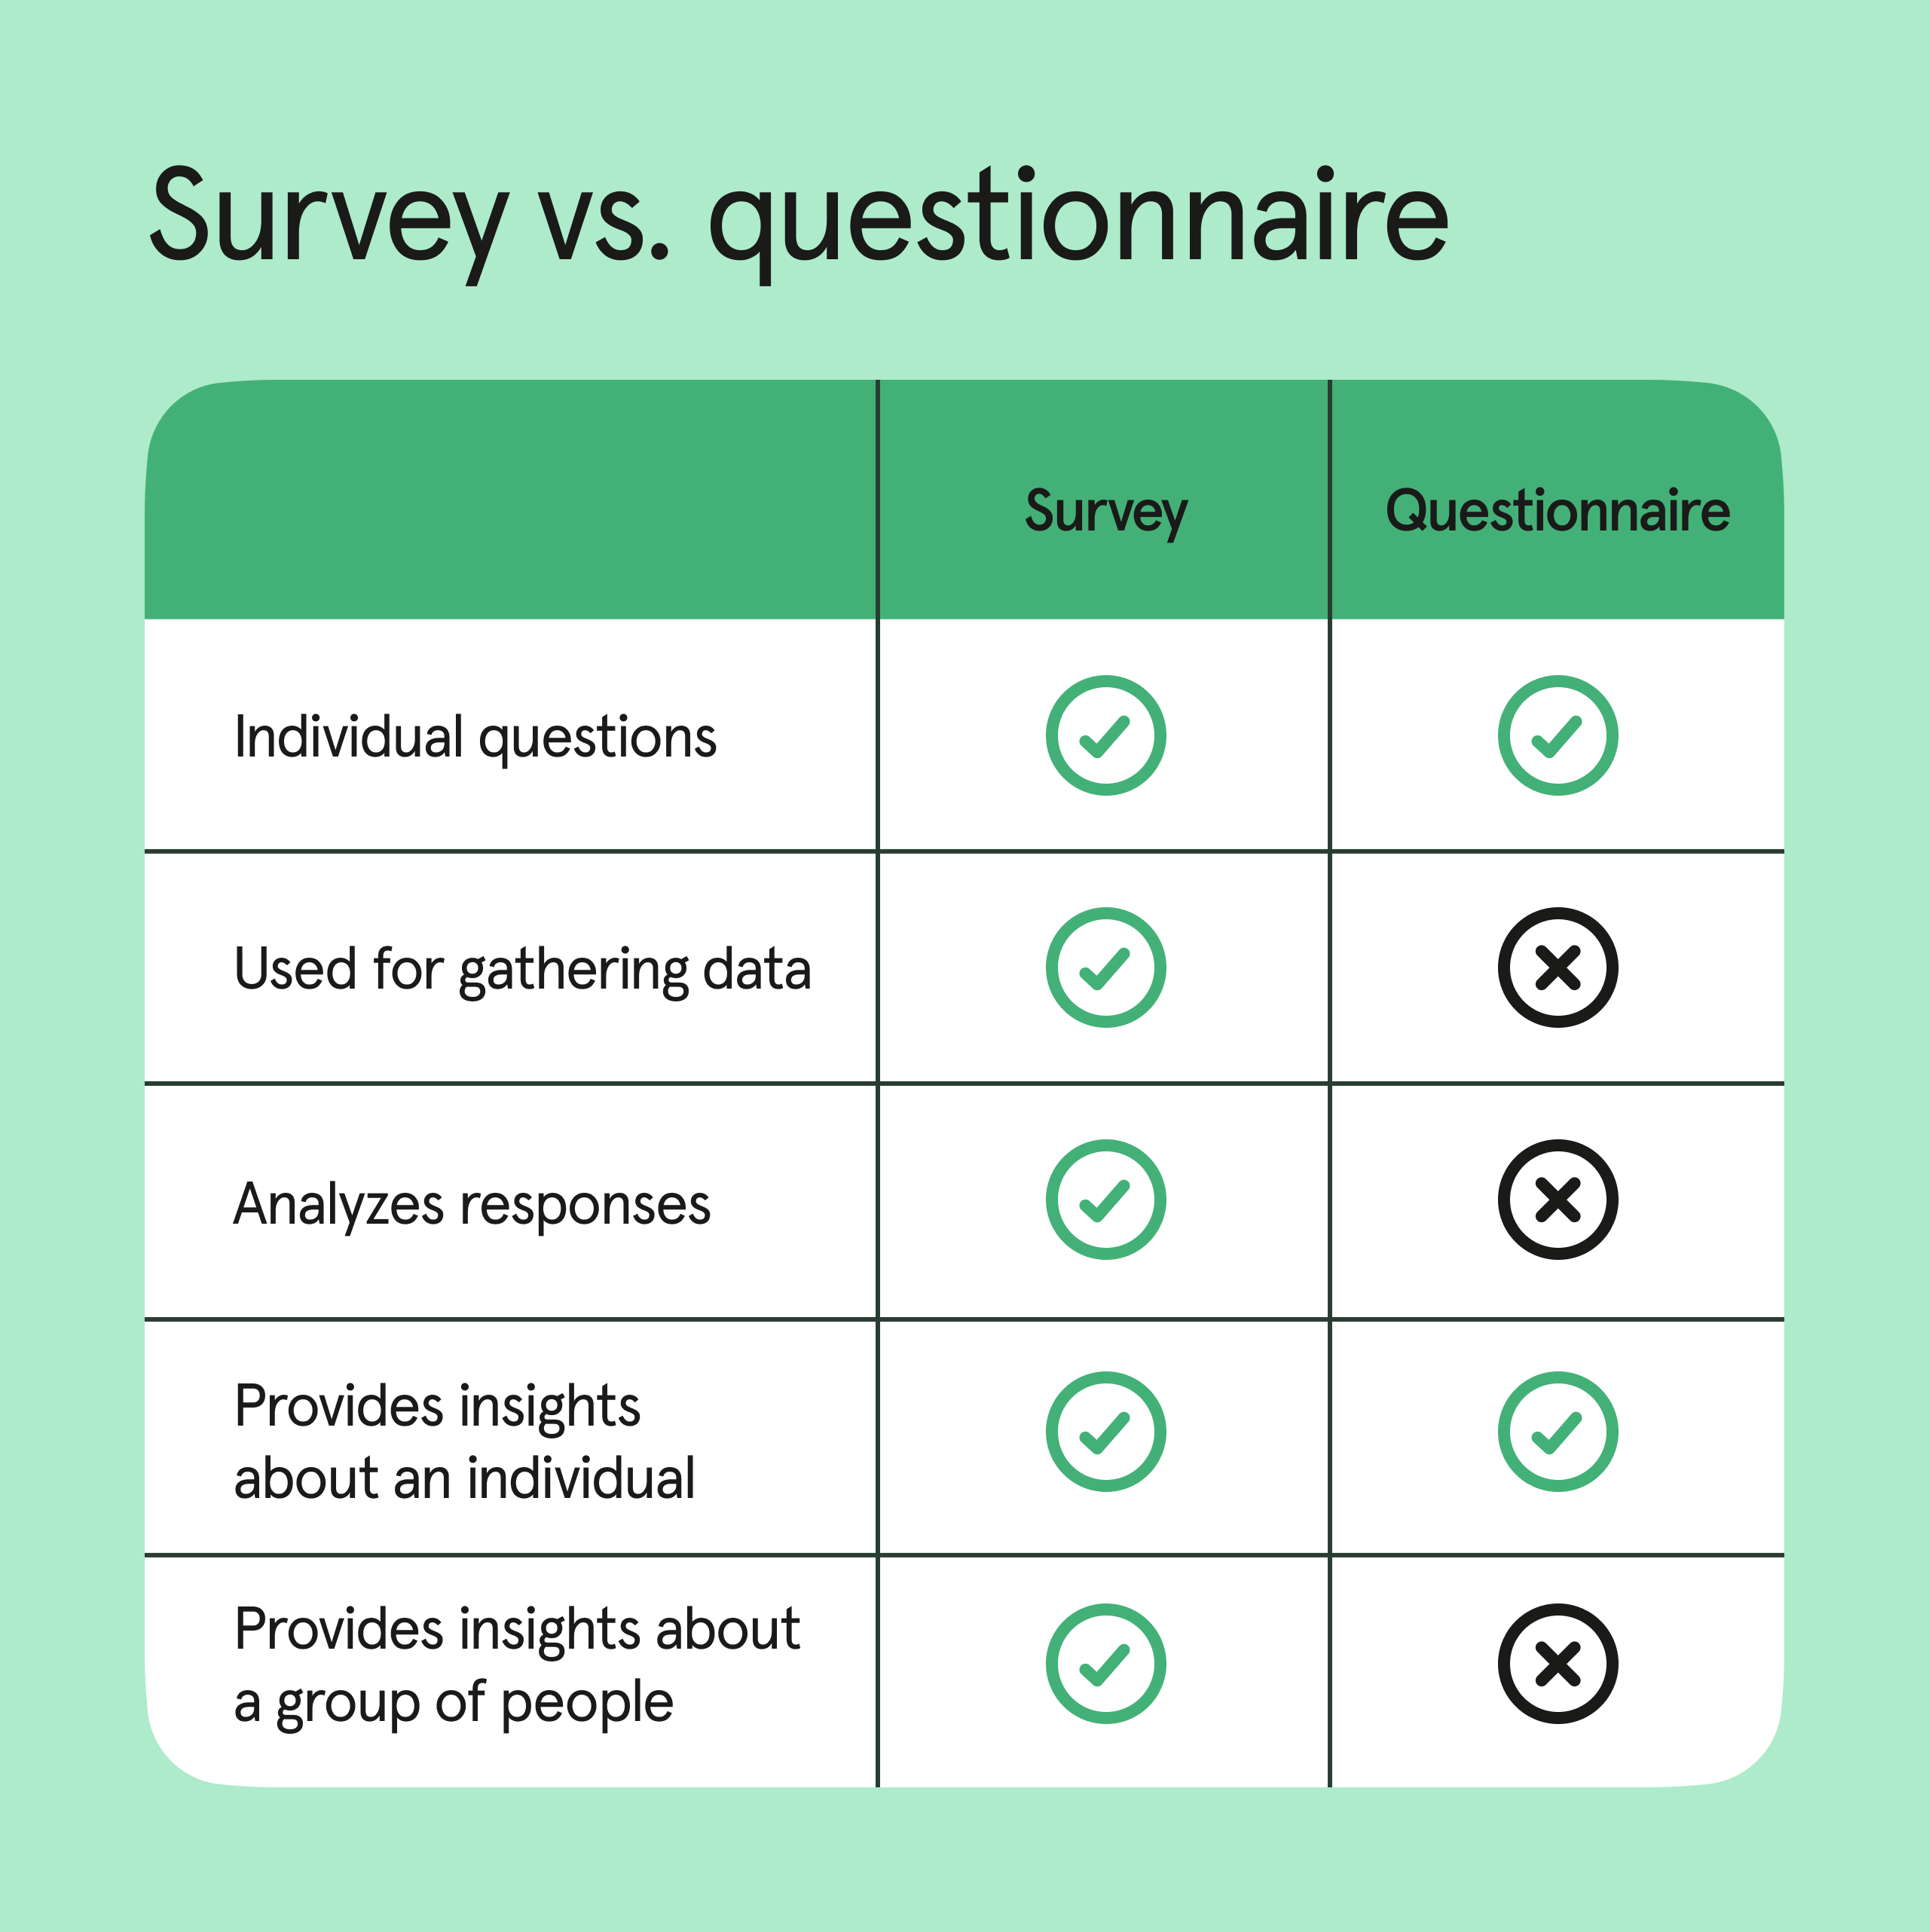 Chart covers the main differences between a survey vs. questionnaire.